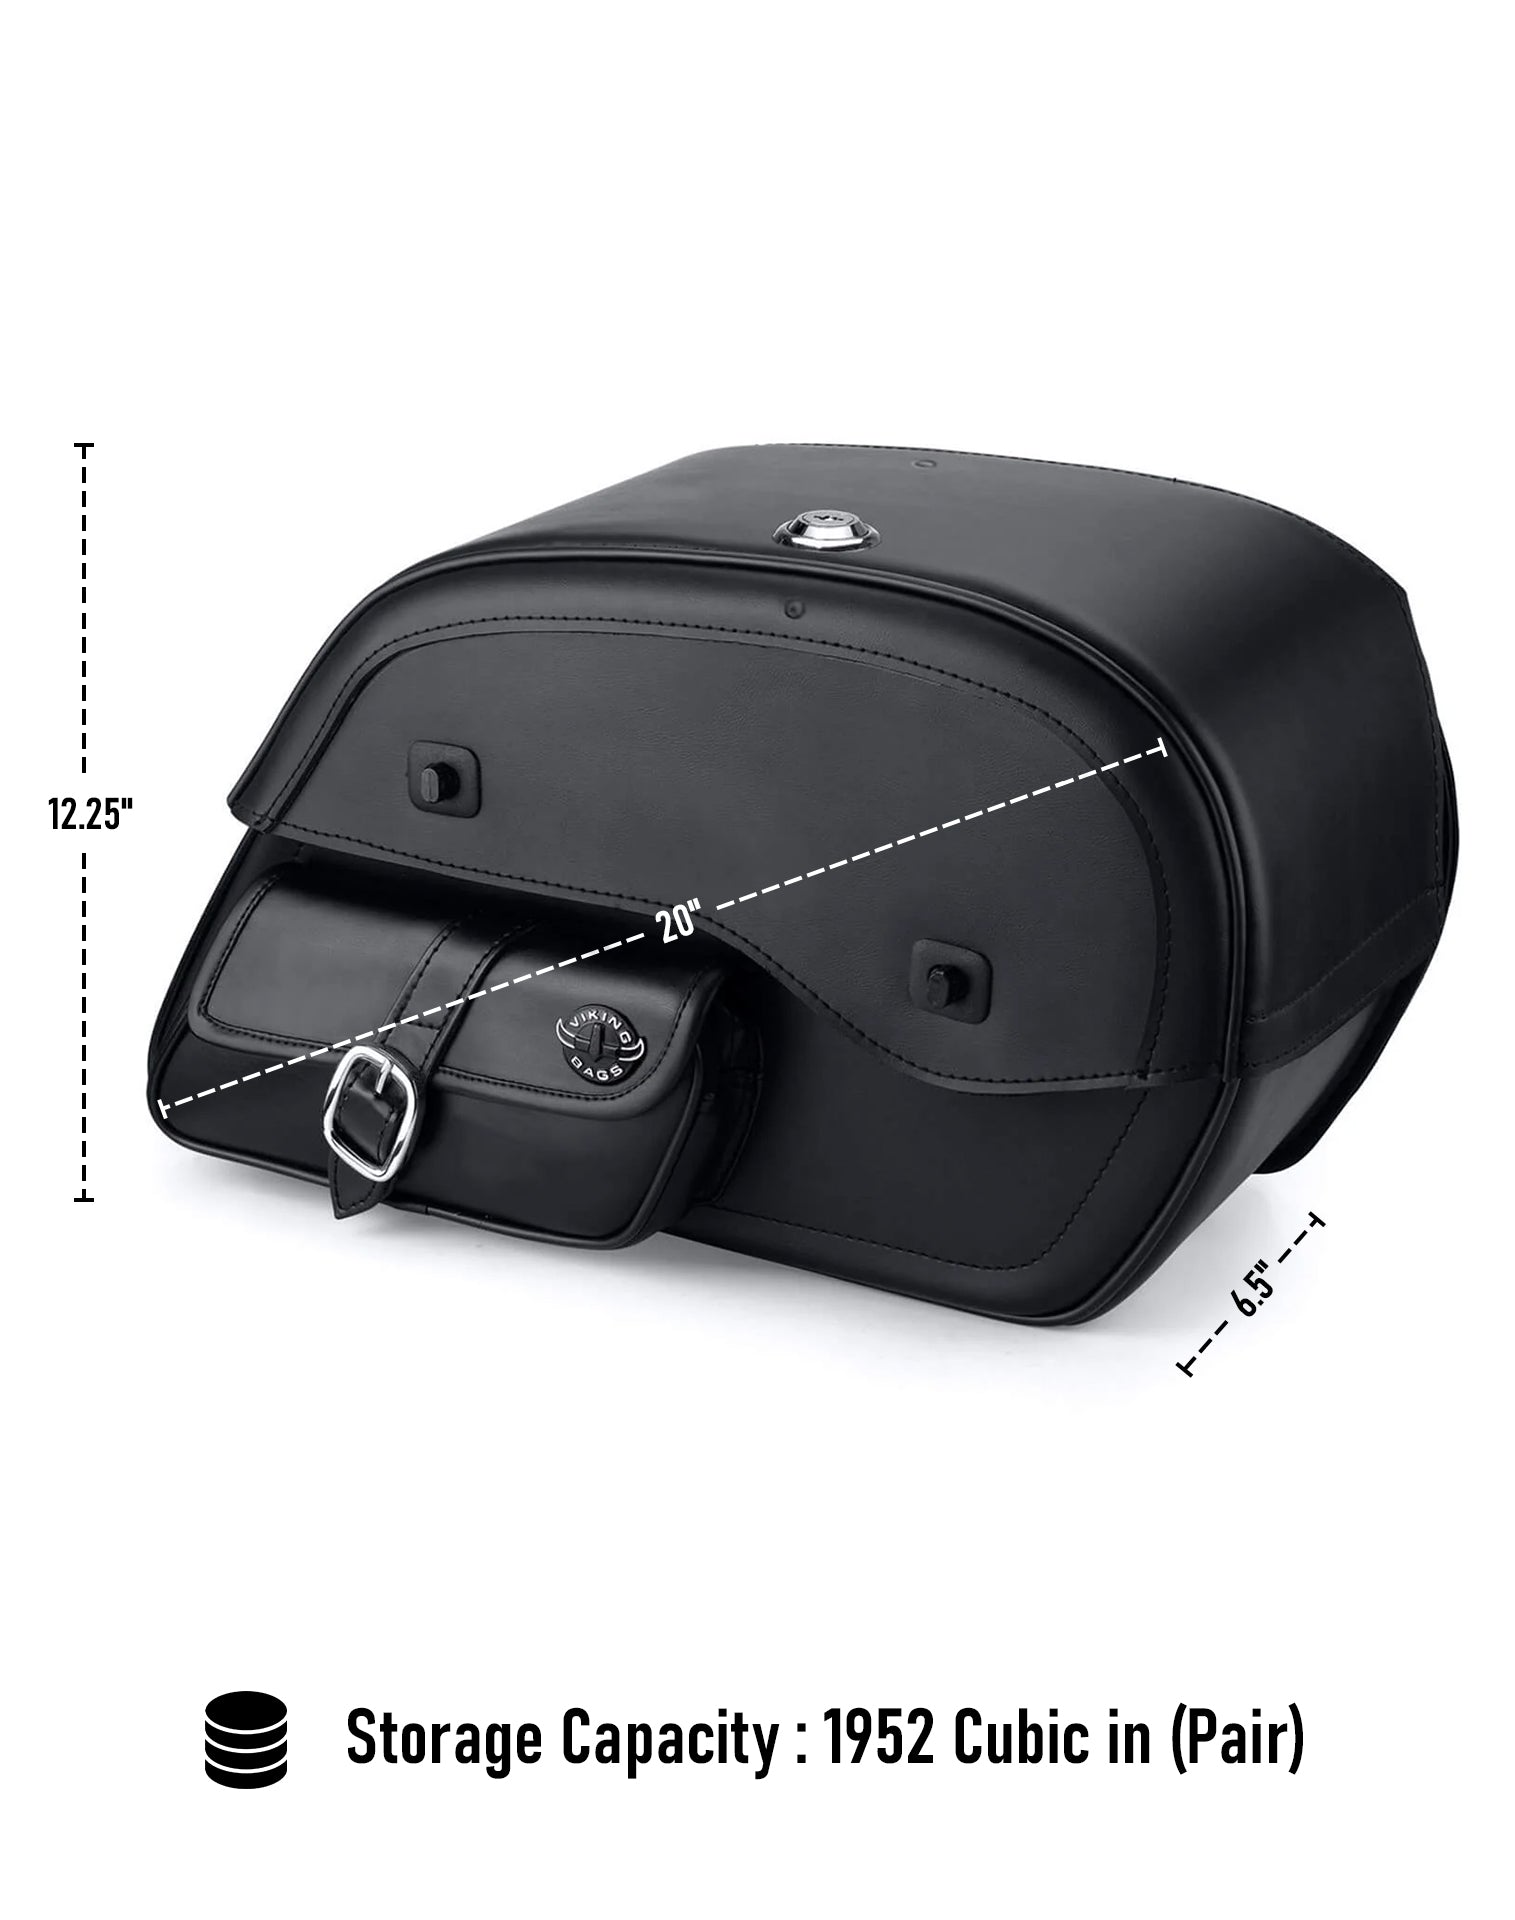 Viking Essential Side Pocket Large Leather Motorcycle Saddlebags For Harley Softail Low Rider Fxlr Can Store Your Ridings Gears